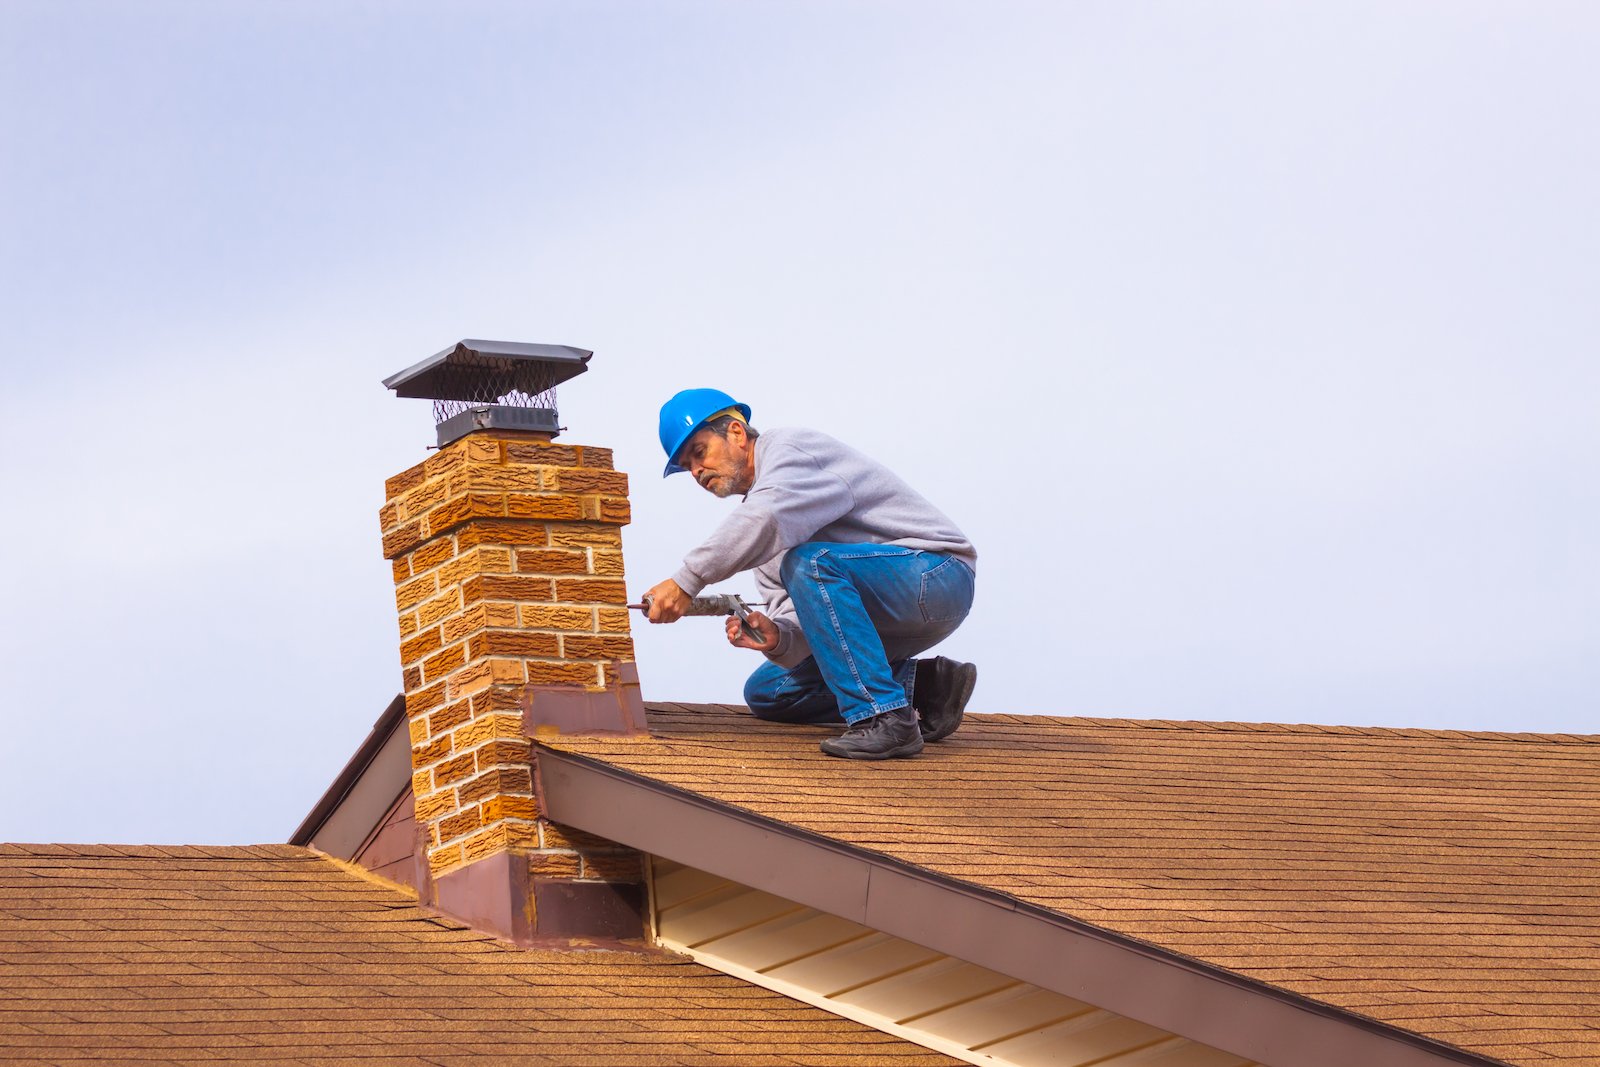 Roof maintenance checklist: is any of the caulking cracked?